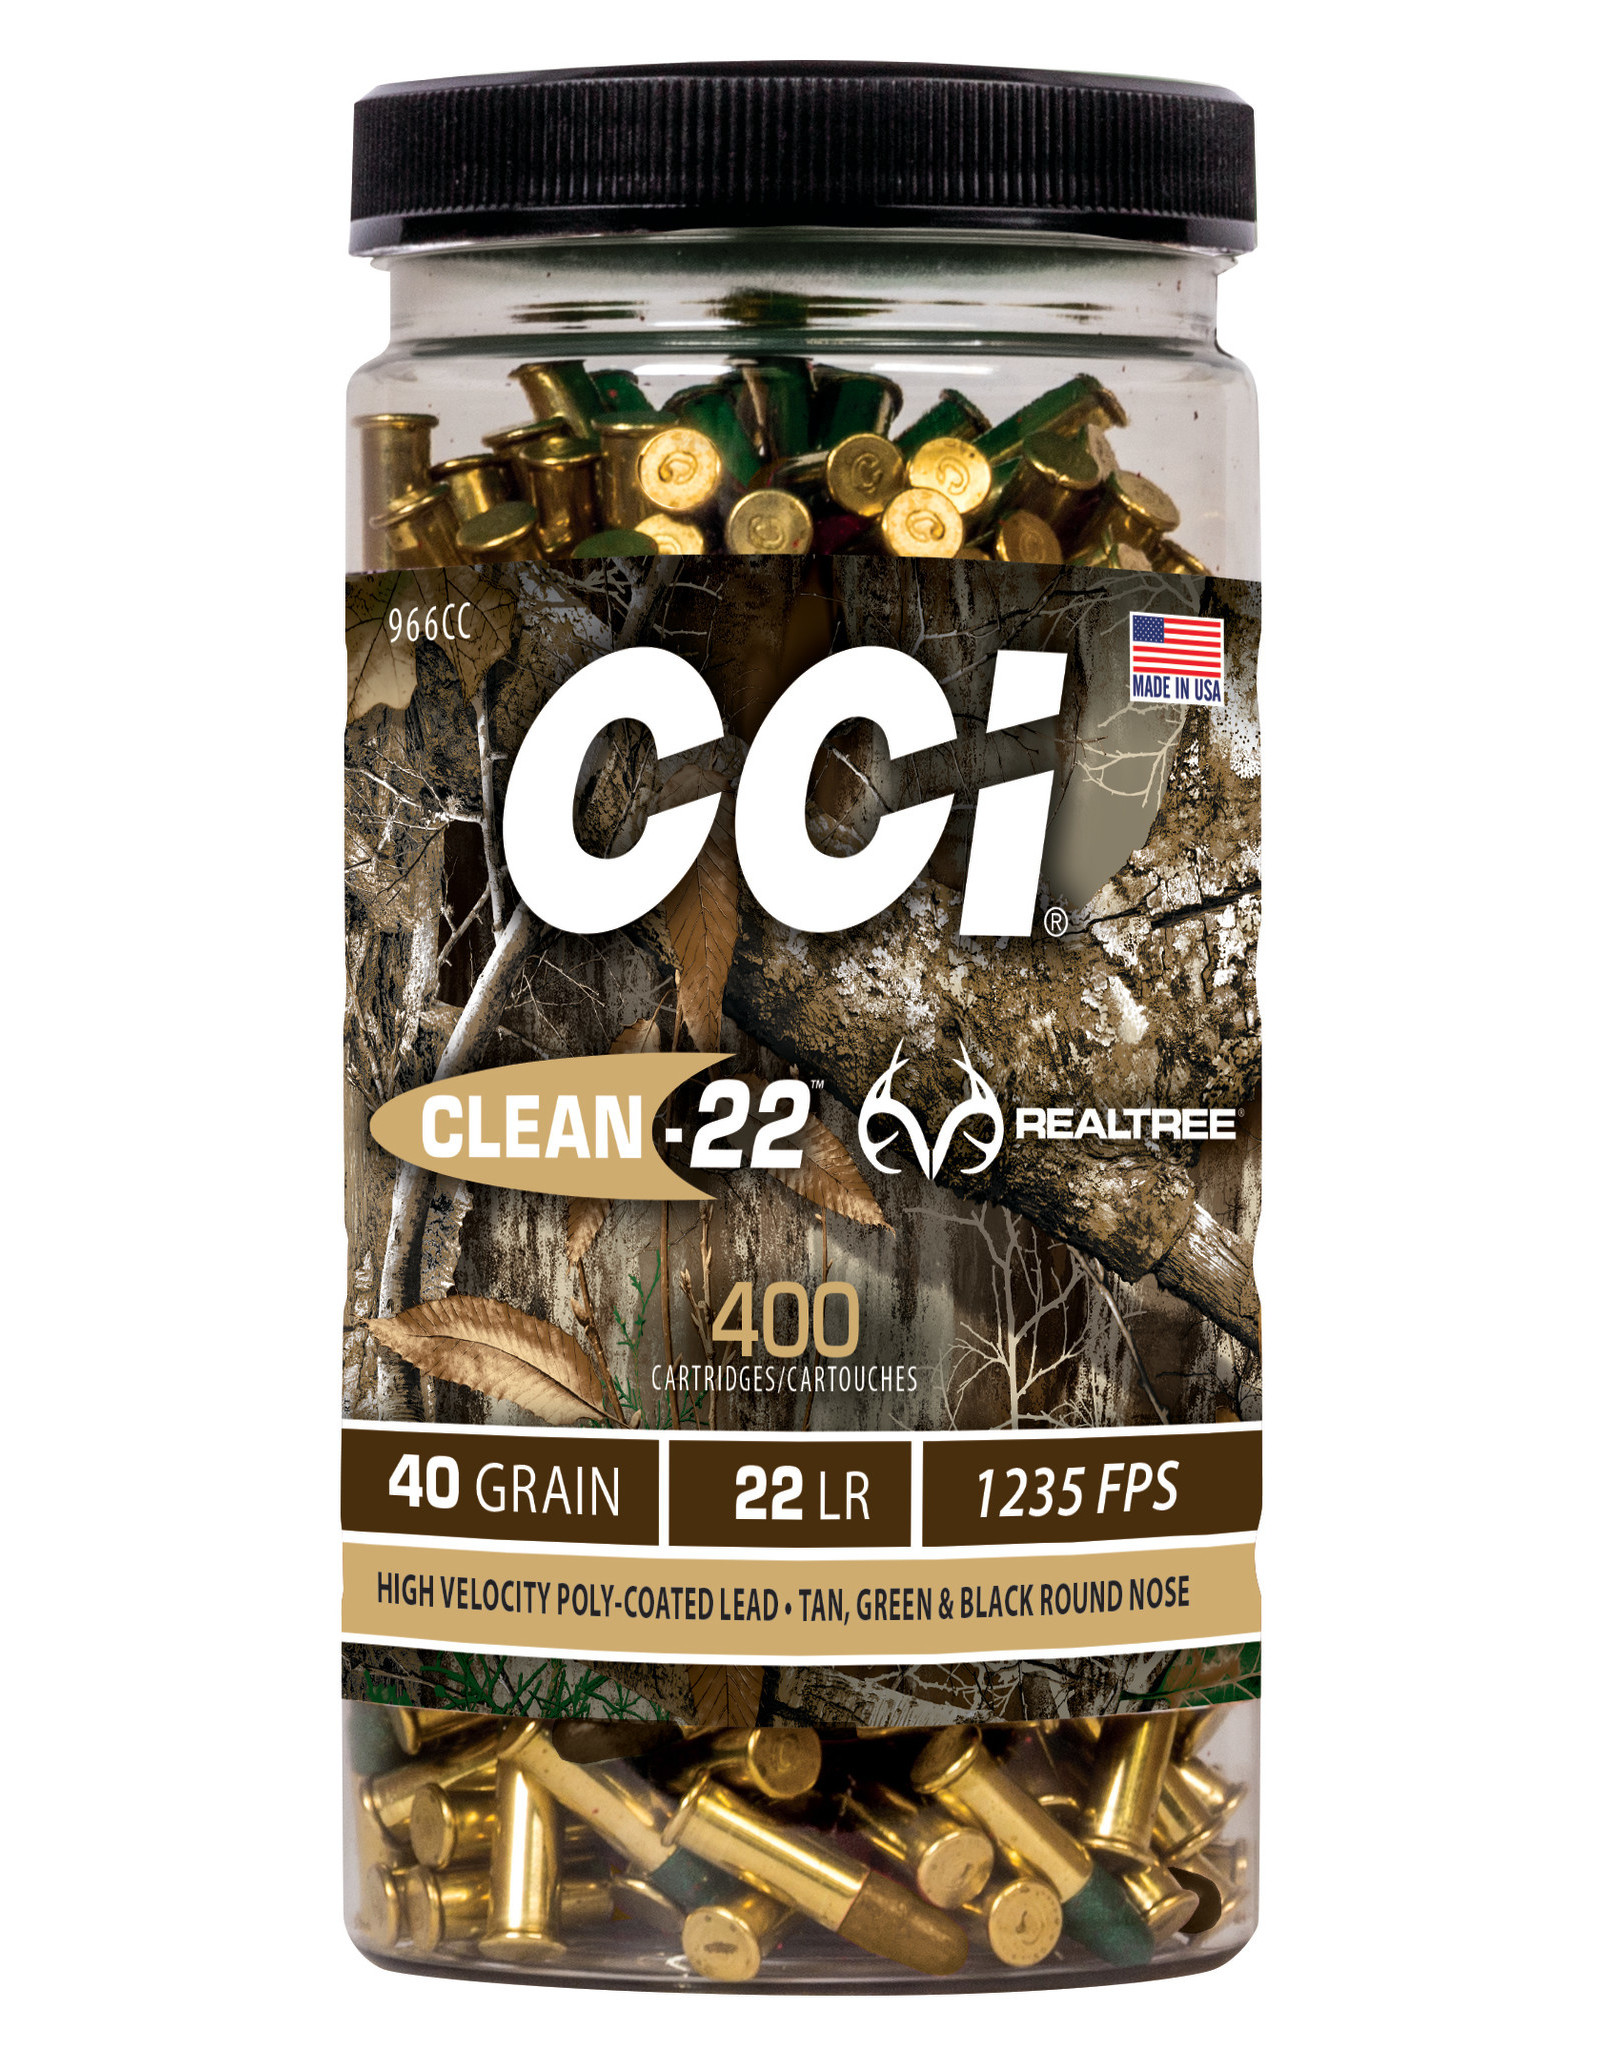 CCI CCI CLEAN-22 REALTREE 22LR 40GR POLY COATED 400CT BOTTLE